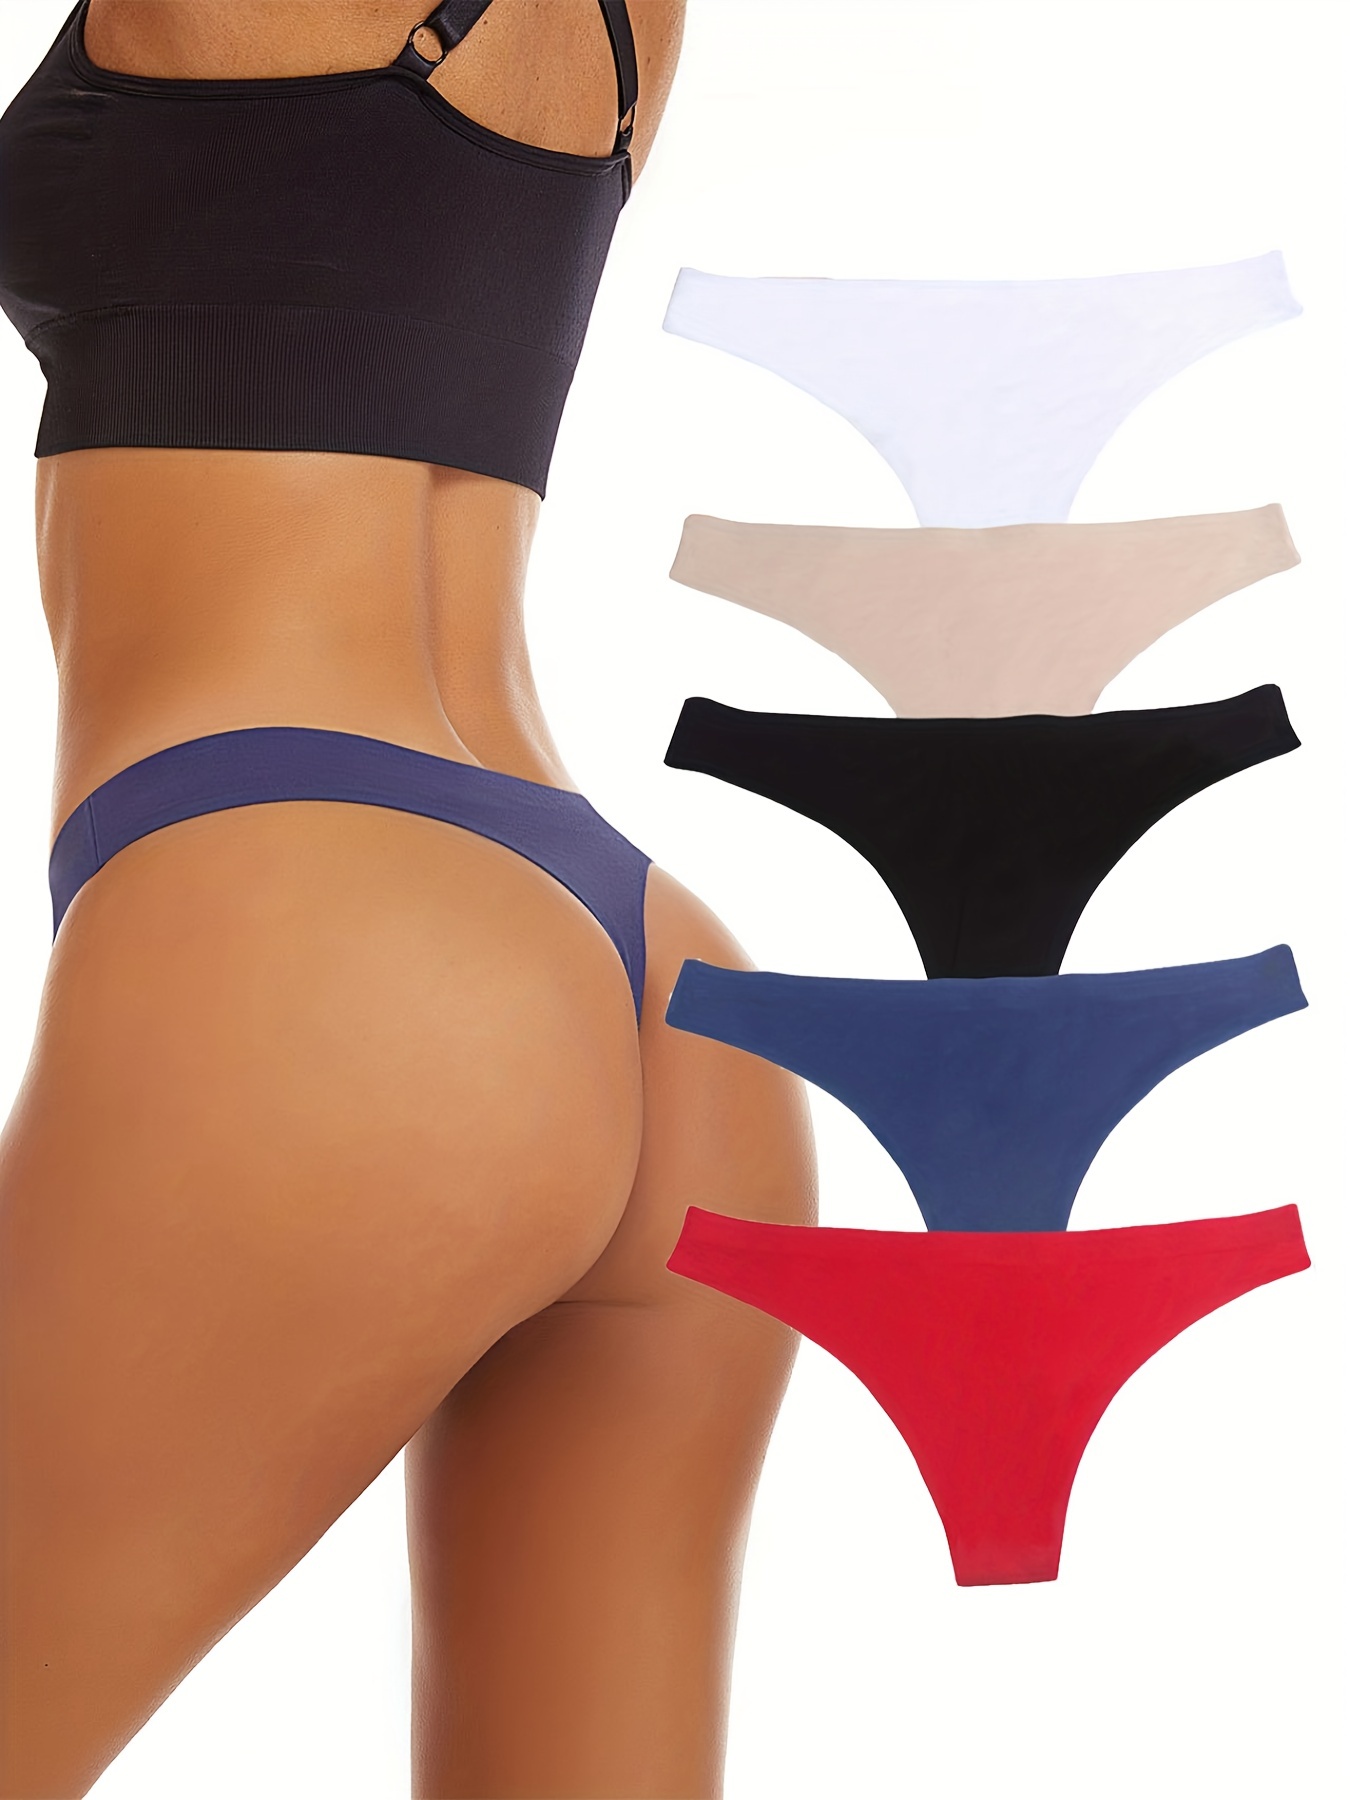  Low Rise Thongs for Womens Seamless Underwear Stretch